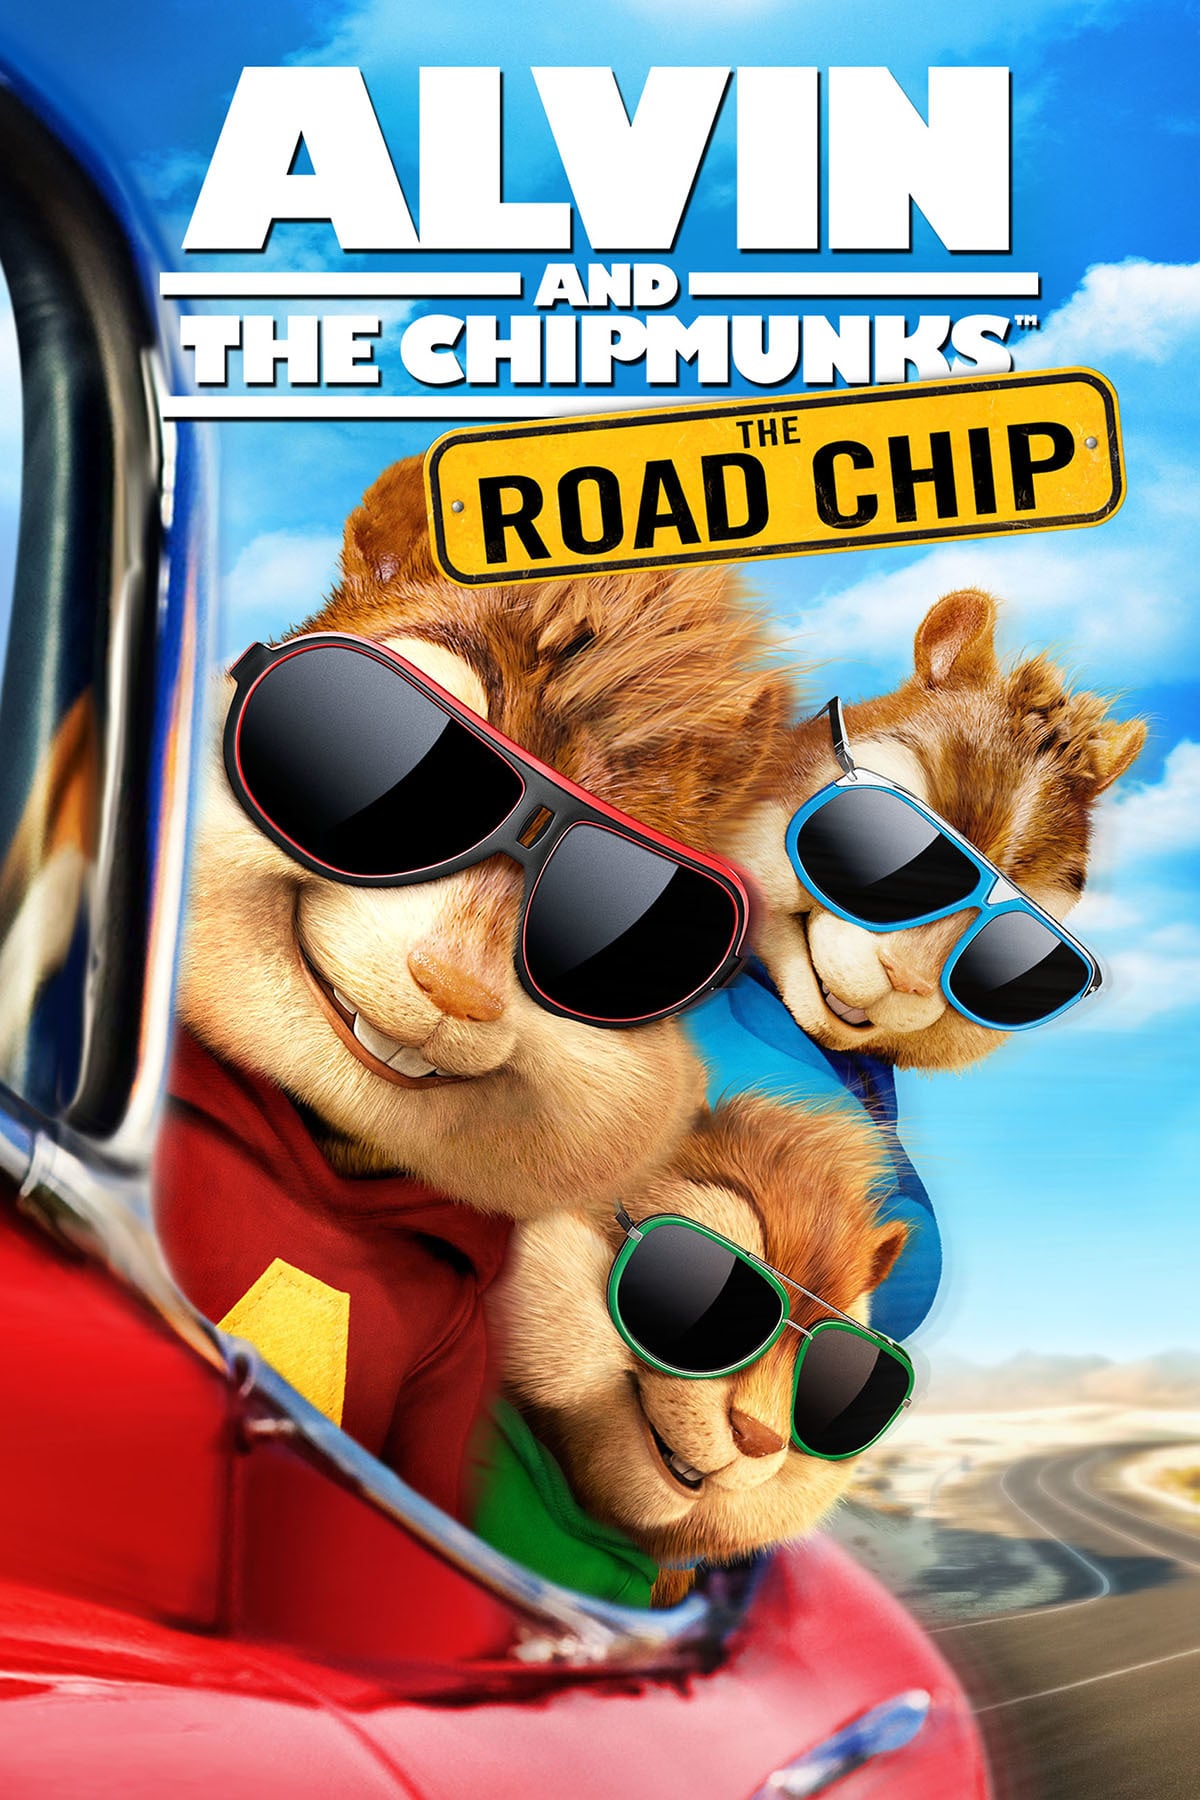 Alvin and the Chipmunks: The Road Chip, 2015 